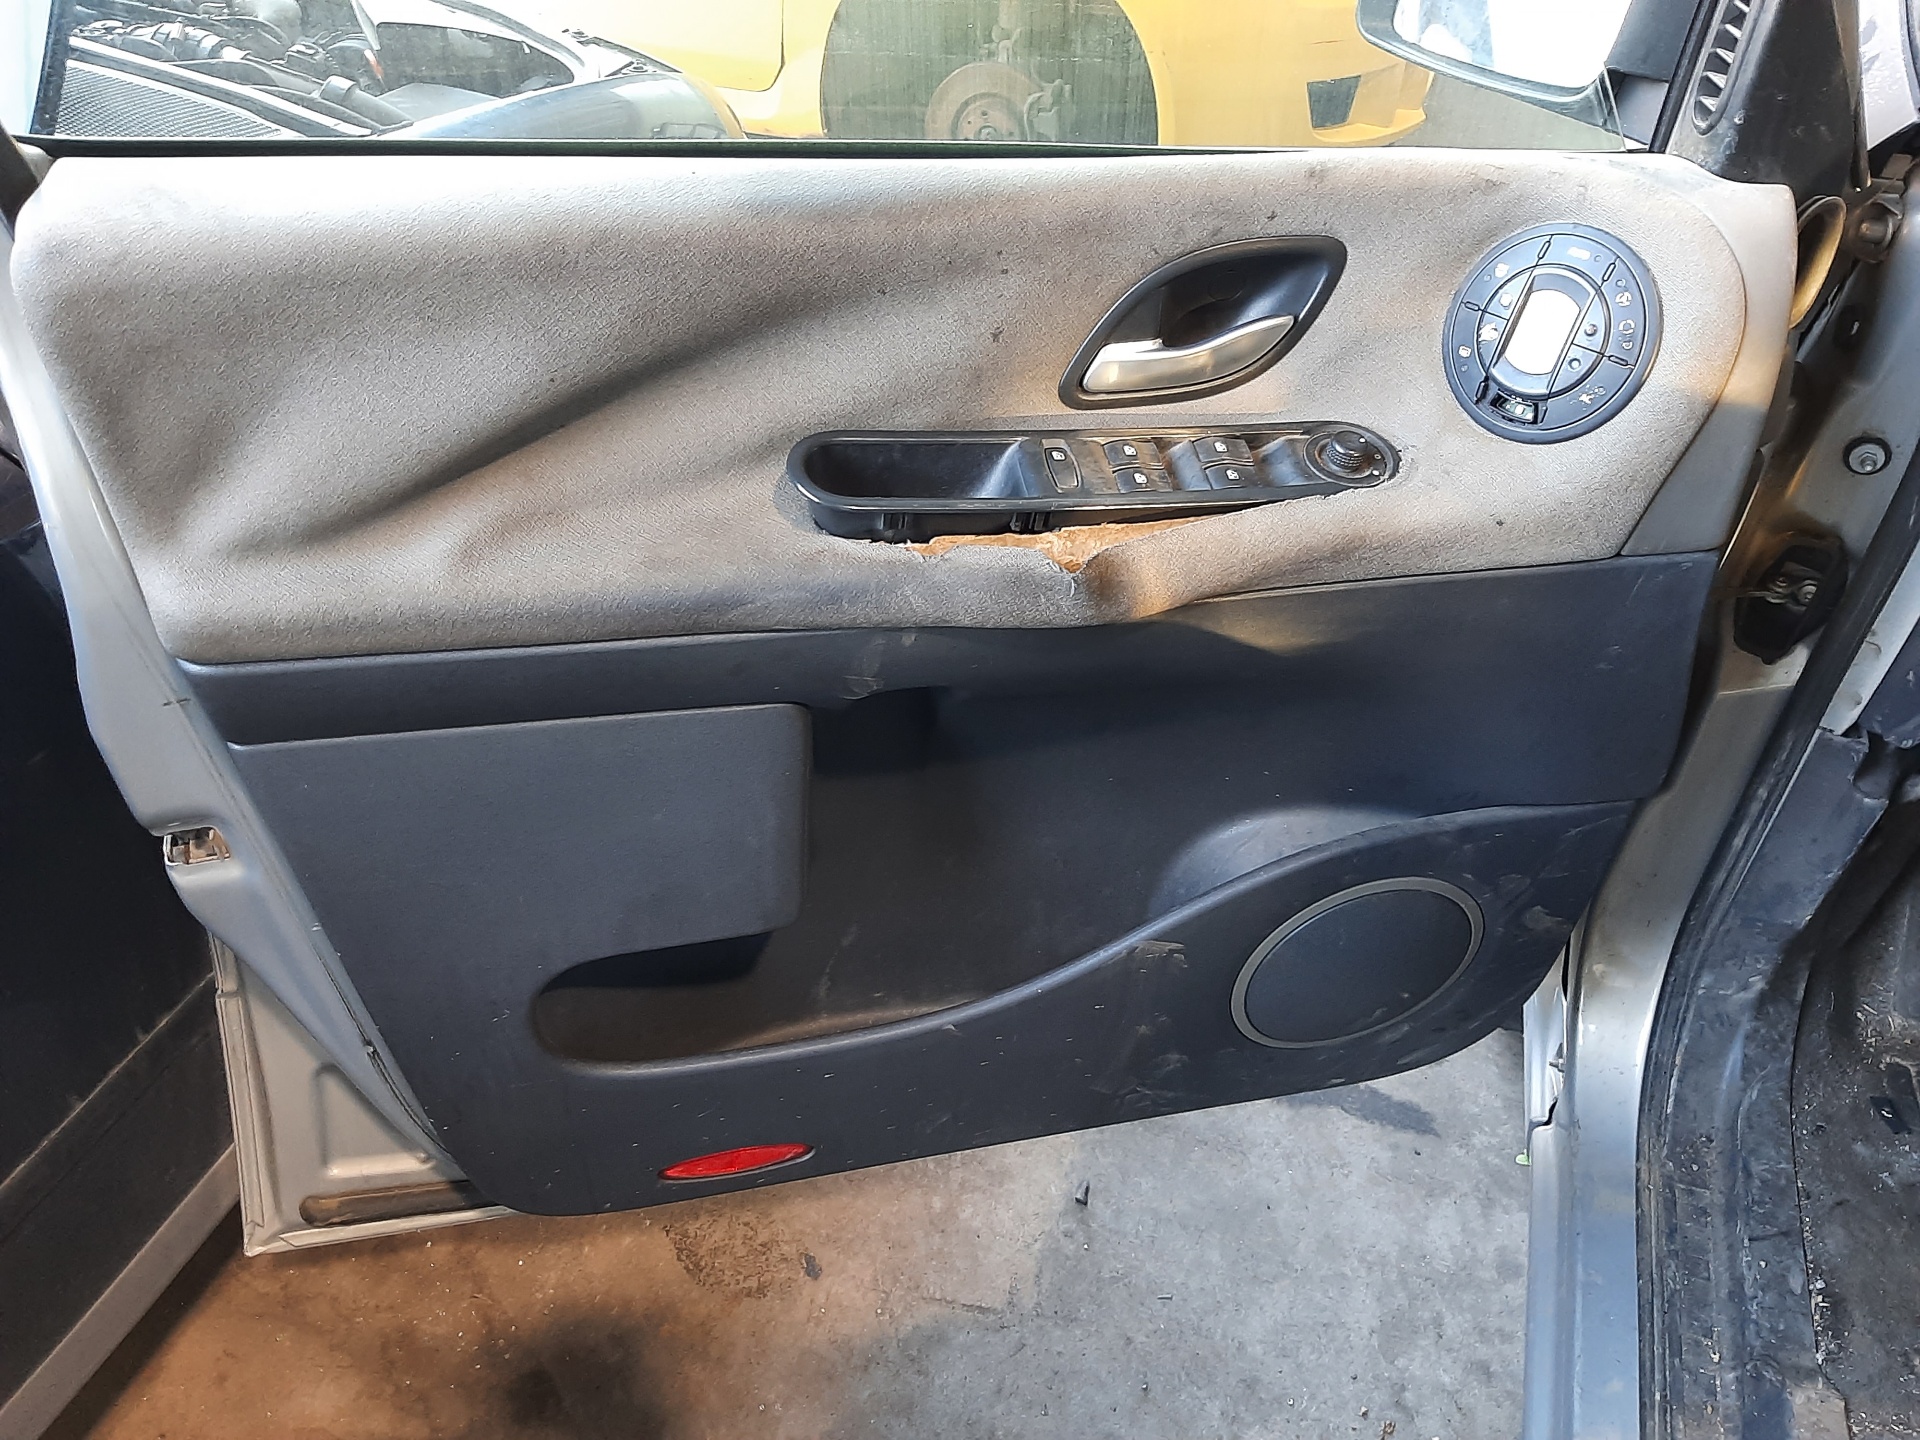 RENAULT Espace 4 generation (2002-2014) Other parts of the rear bumper 8200027154 24122066